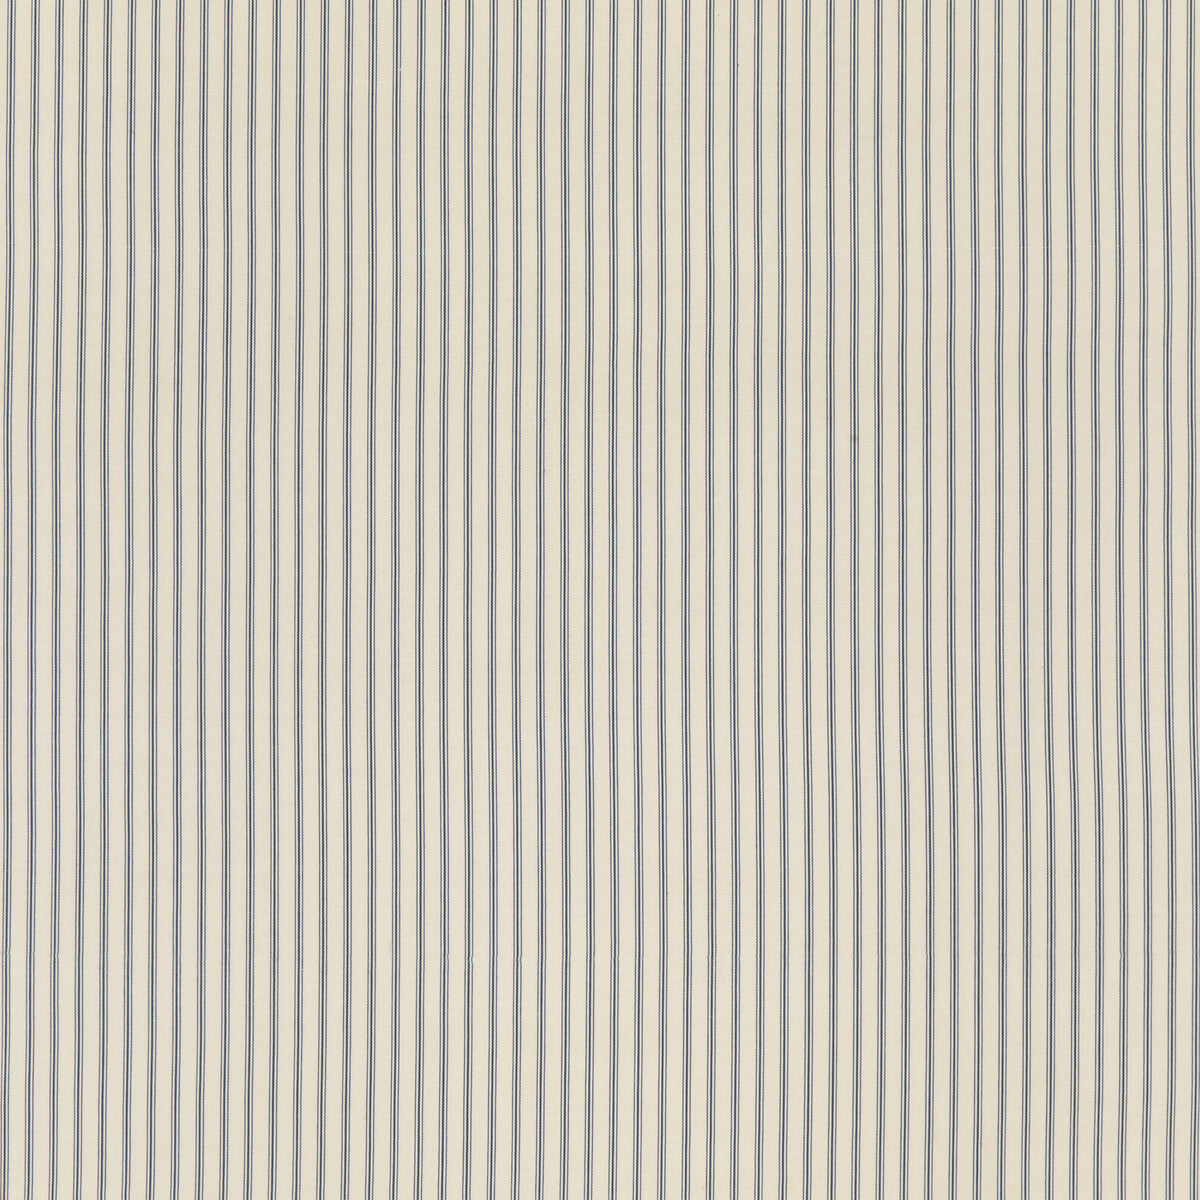 Renwick fabric in indigo color - pattern ED85300.680.0 - by Threads in the Great Stripes collection